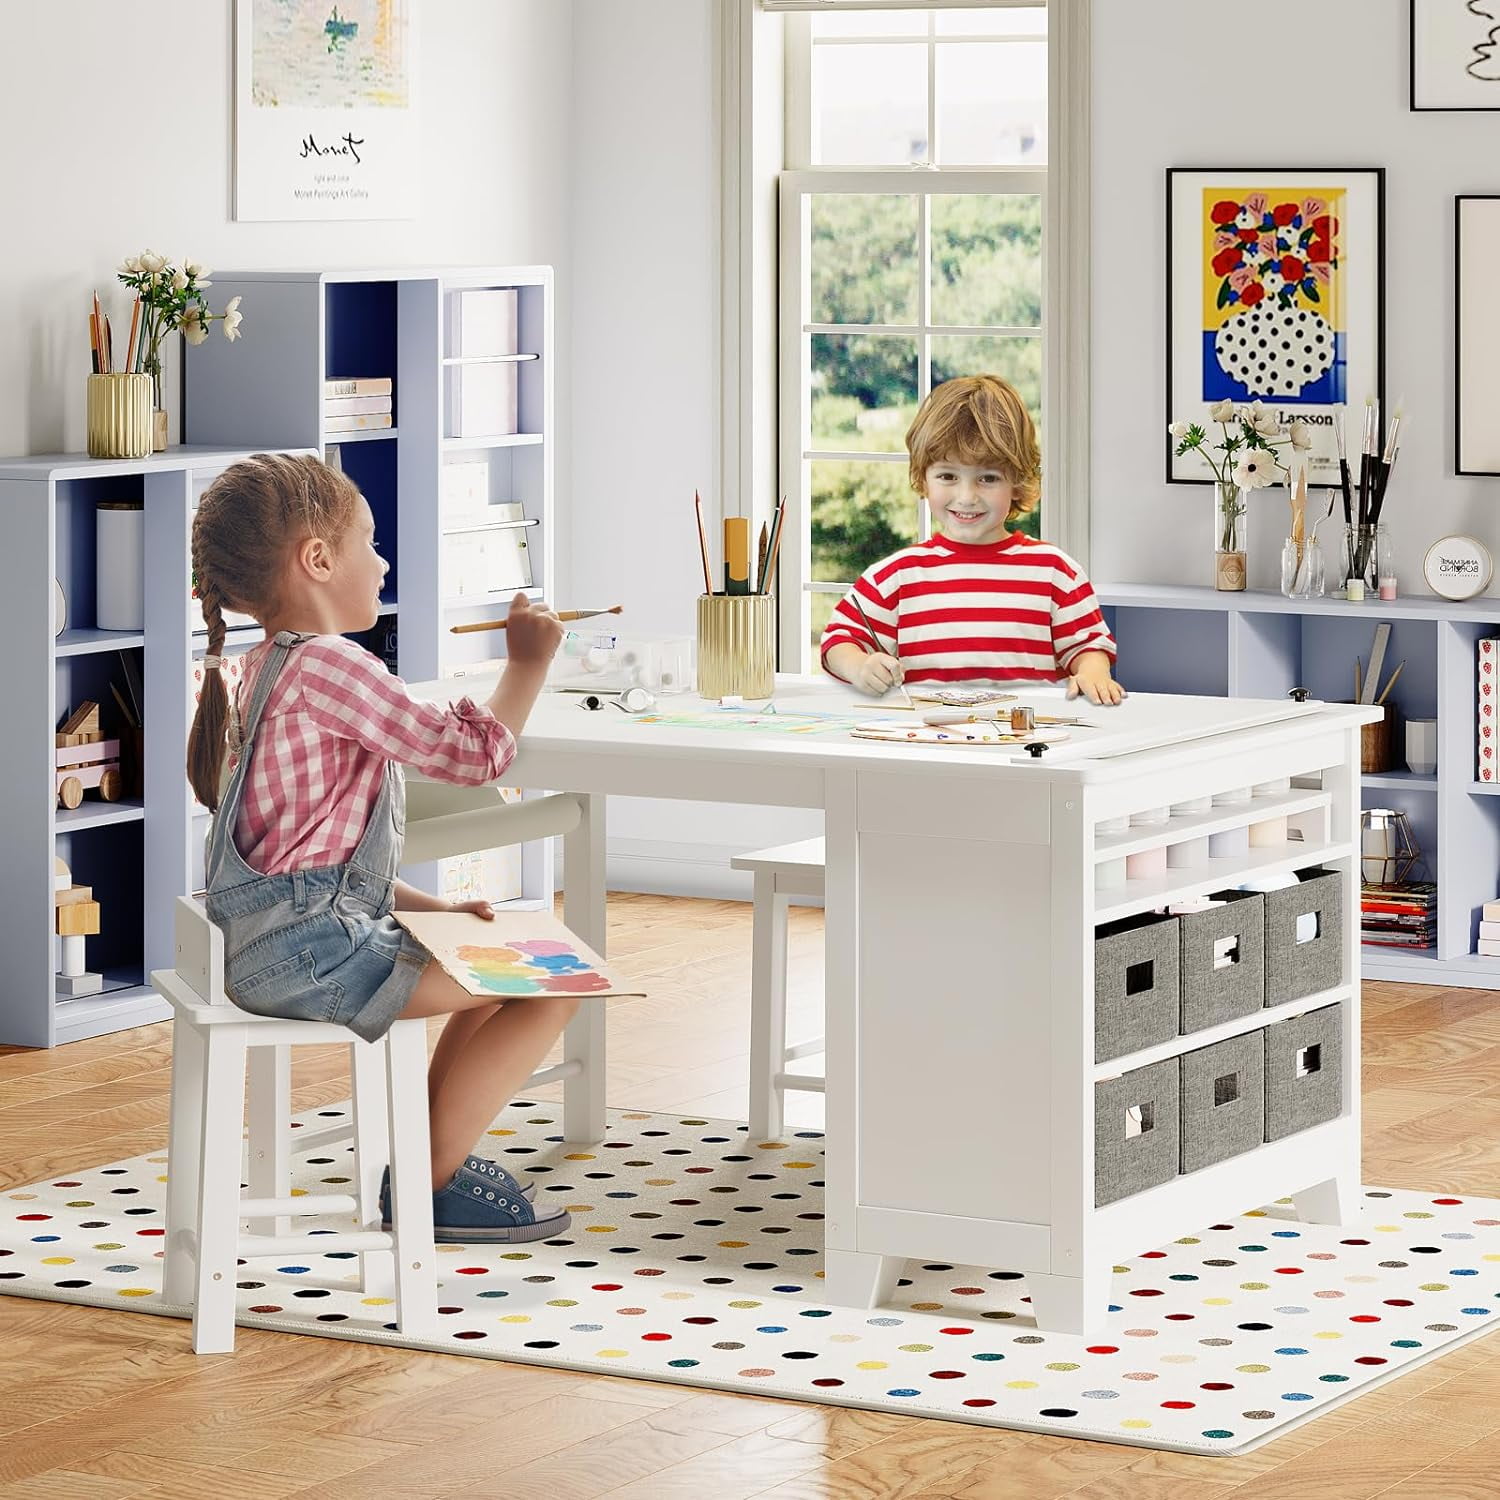 BALUS Modern Kids' Art Table and Stools Set (Gray), Wooden Drawing and  Painting Desk with Paper Roller and Removable Craft Supplies Storage Bins 